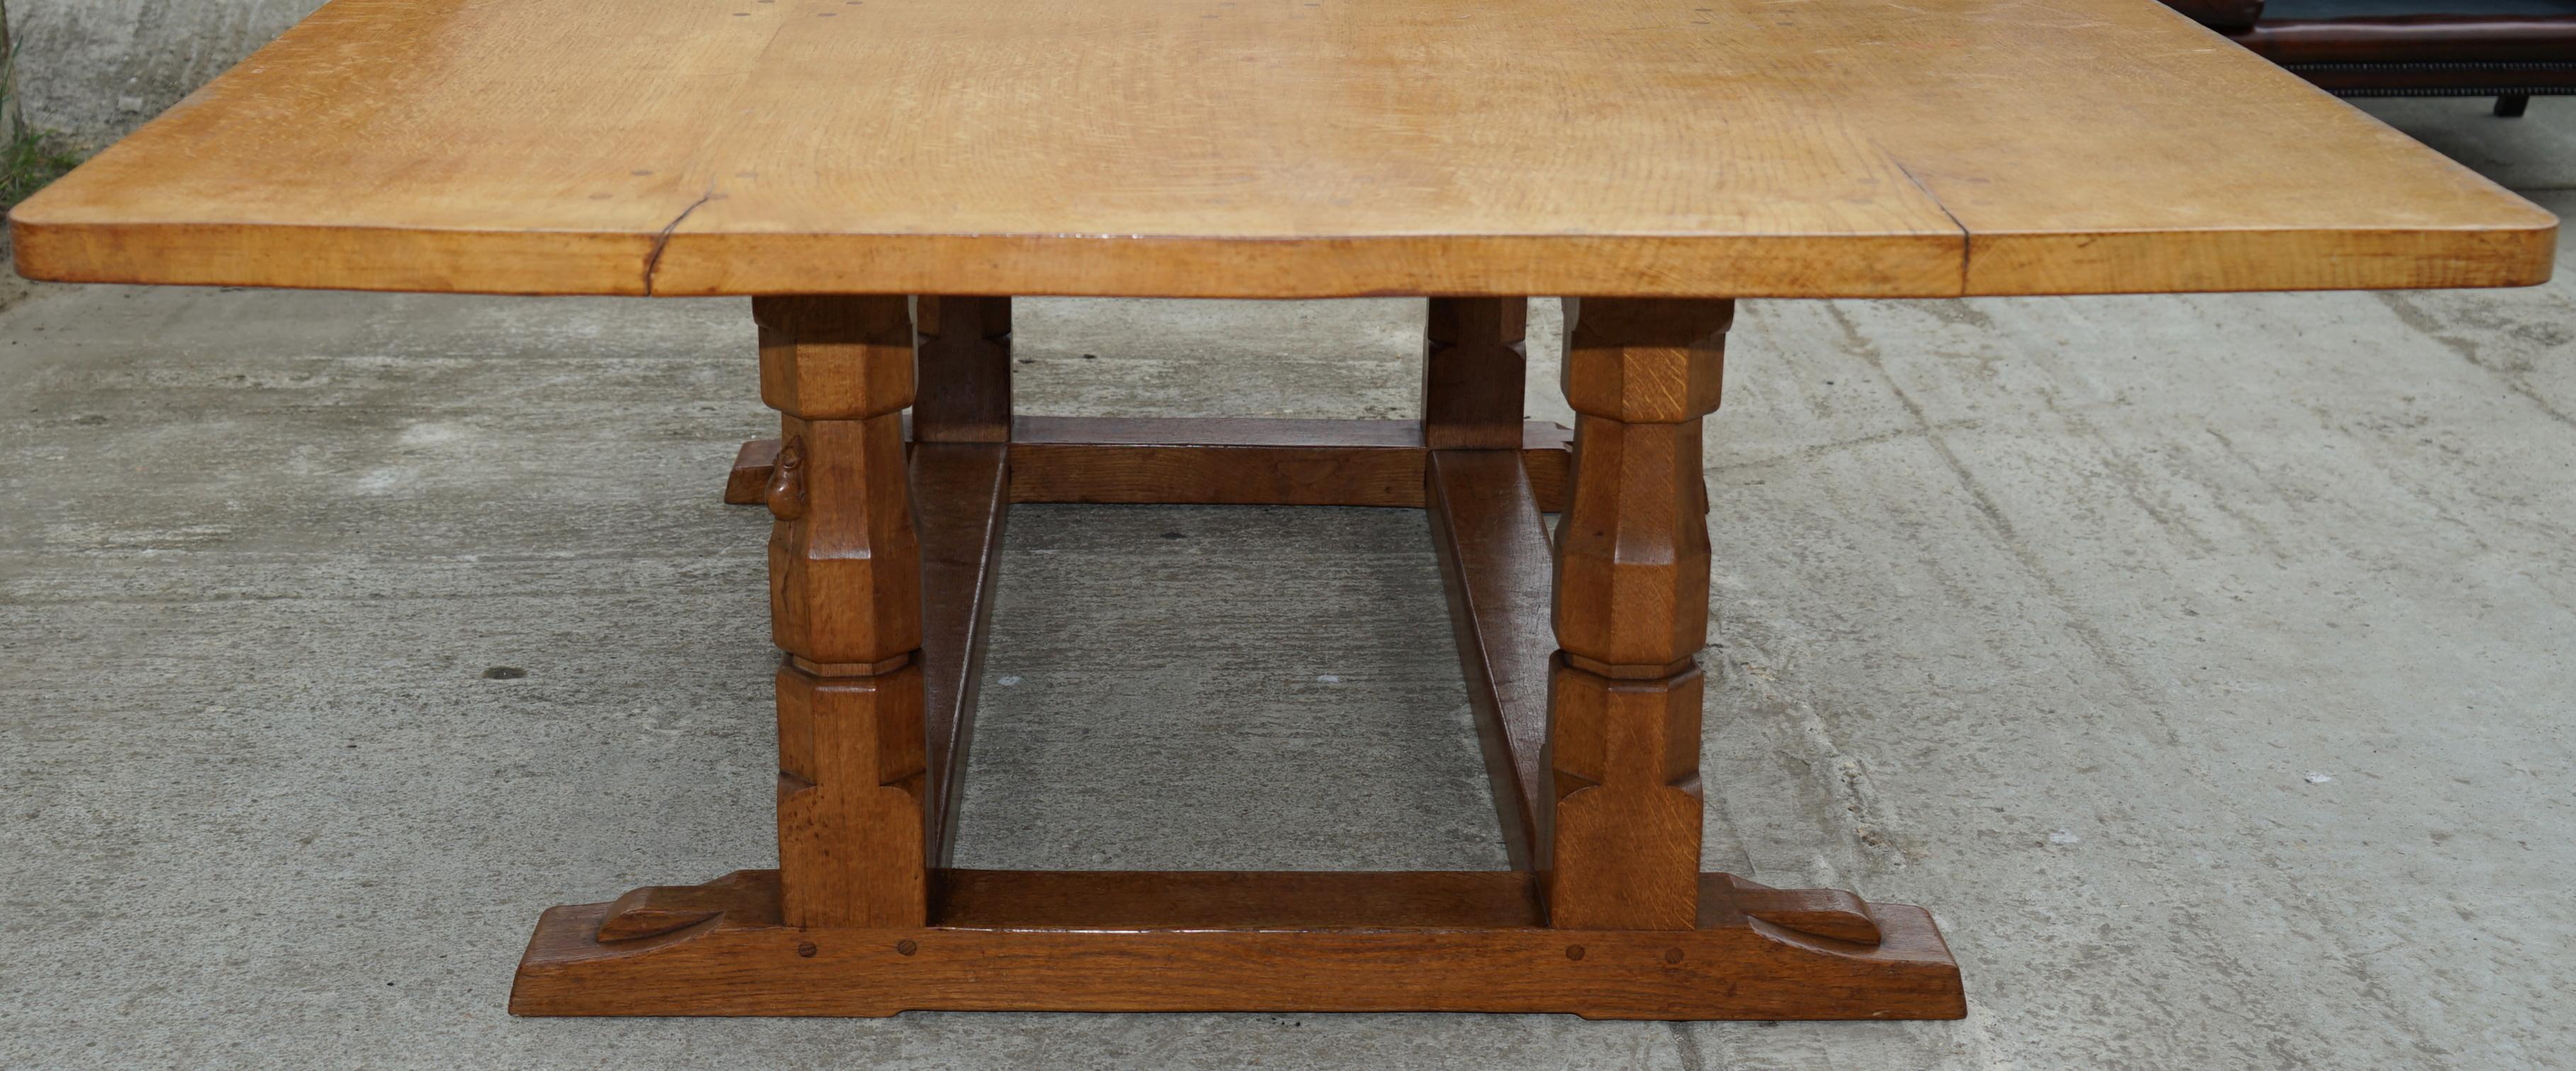 Rare Classic Vintage Robert Mouseman Thompson Solid Oak Refectory Dining Table 11